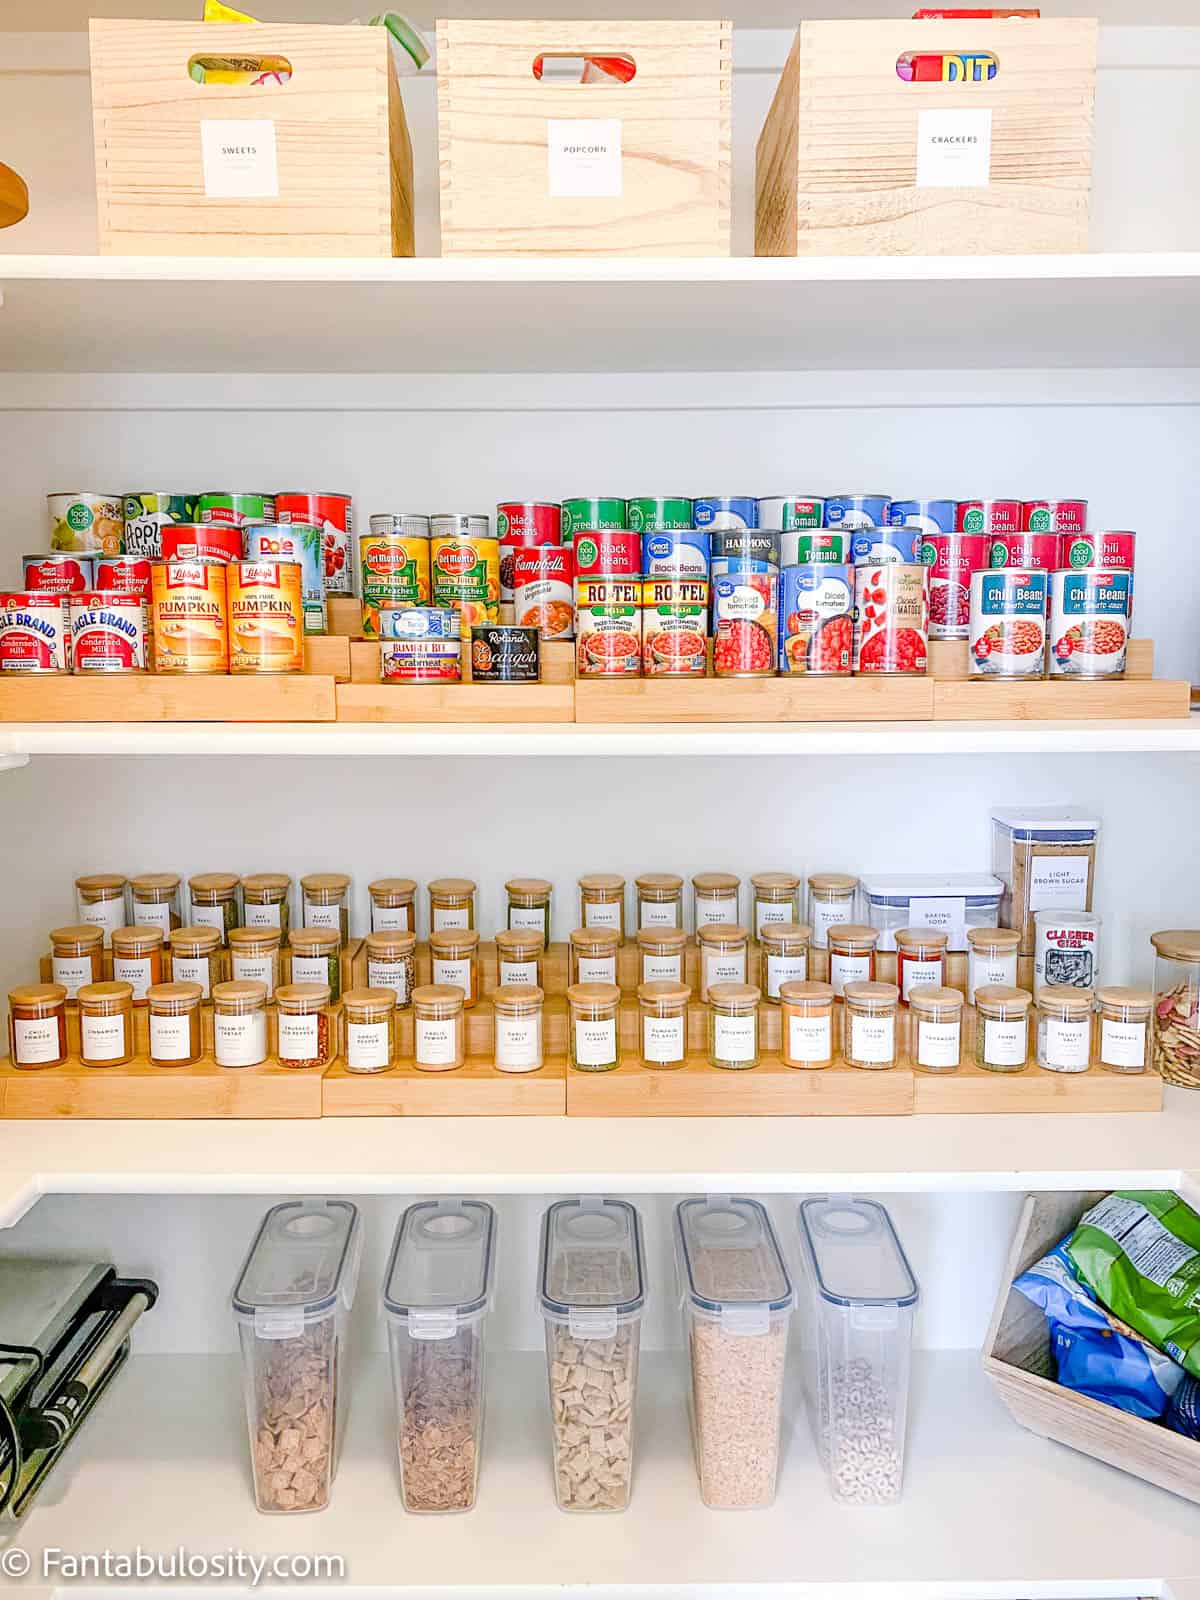 Pantry shelves with organized canned goods and spices